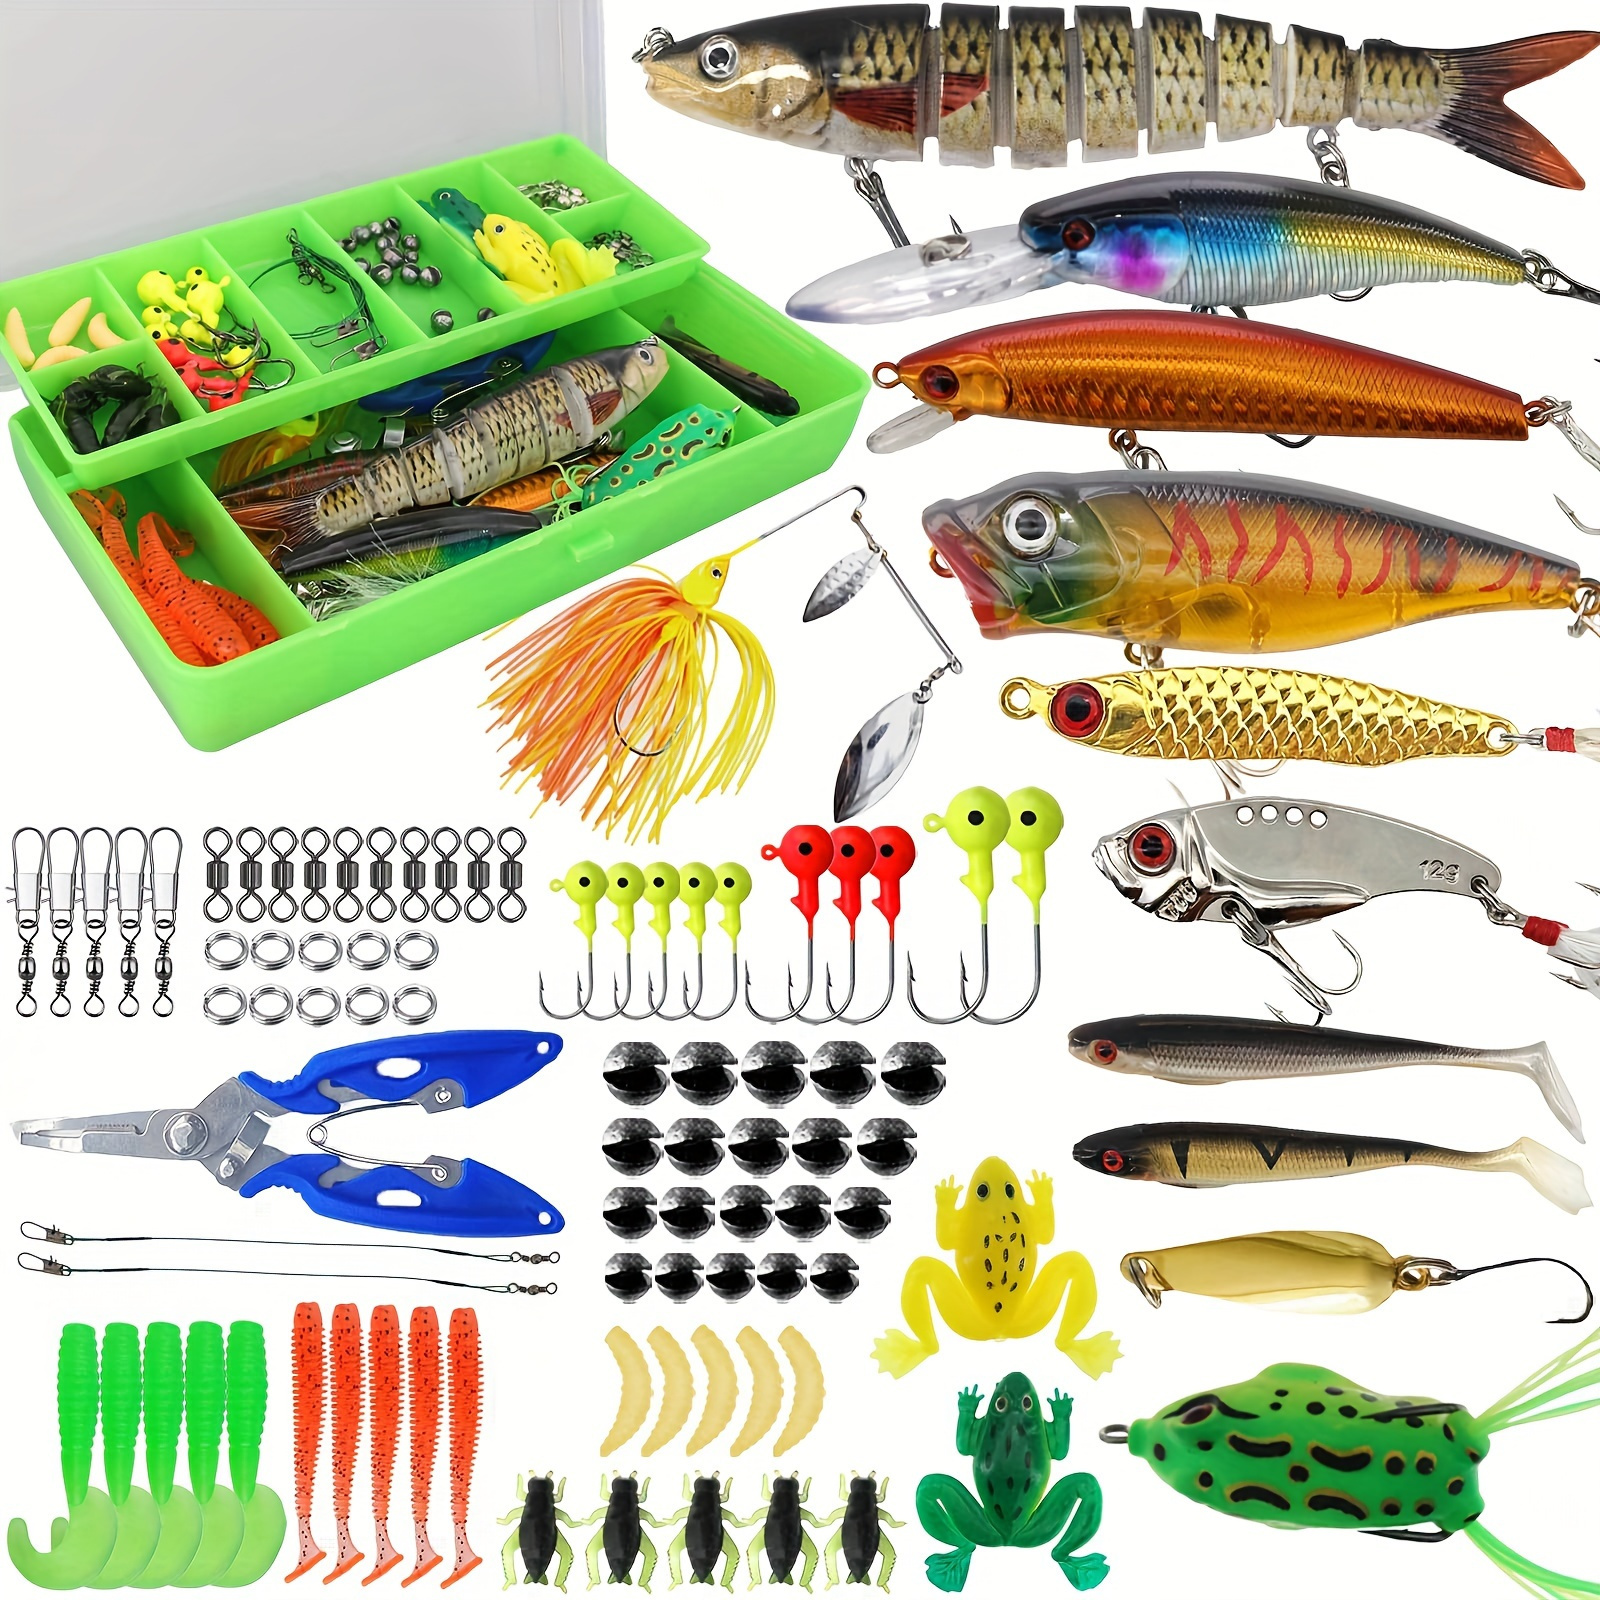 

92/84/78pcs Fishing Lures Tackle Box Bass Fishing Kit, Saltwater And Freshwater Lures Fishing Gear Including Fishing Accessories And Fishing Equipment For Bass, Trout, Salmon